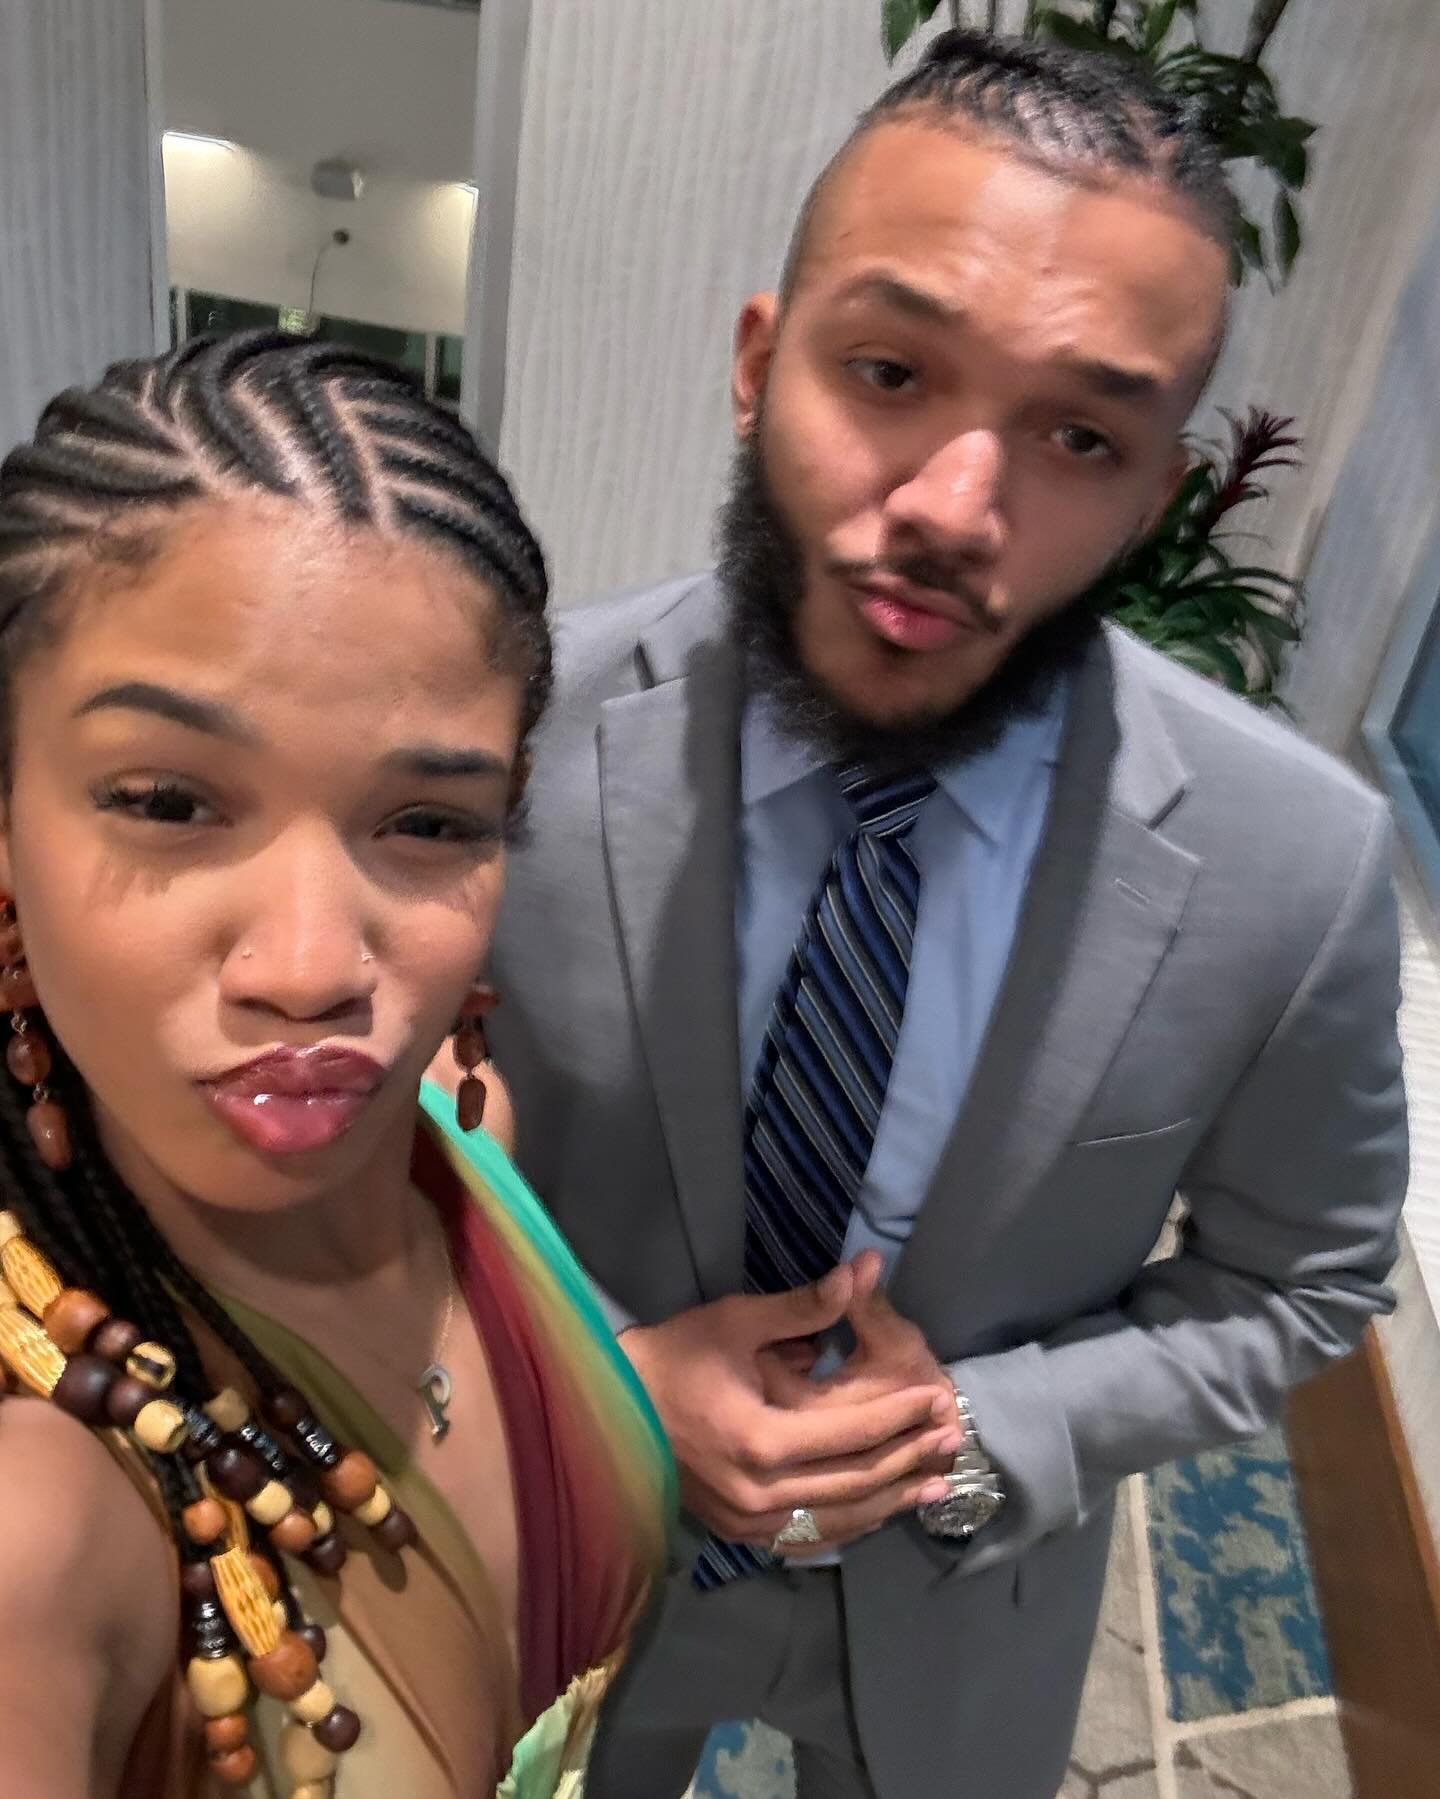 She and her brother Gabriel showed off their braids and fashion sense in photos